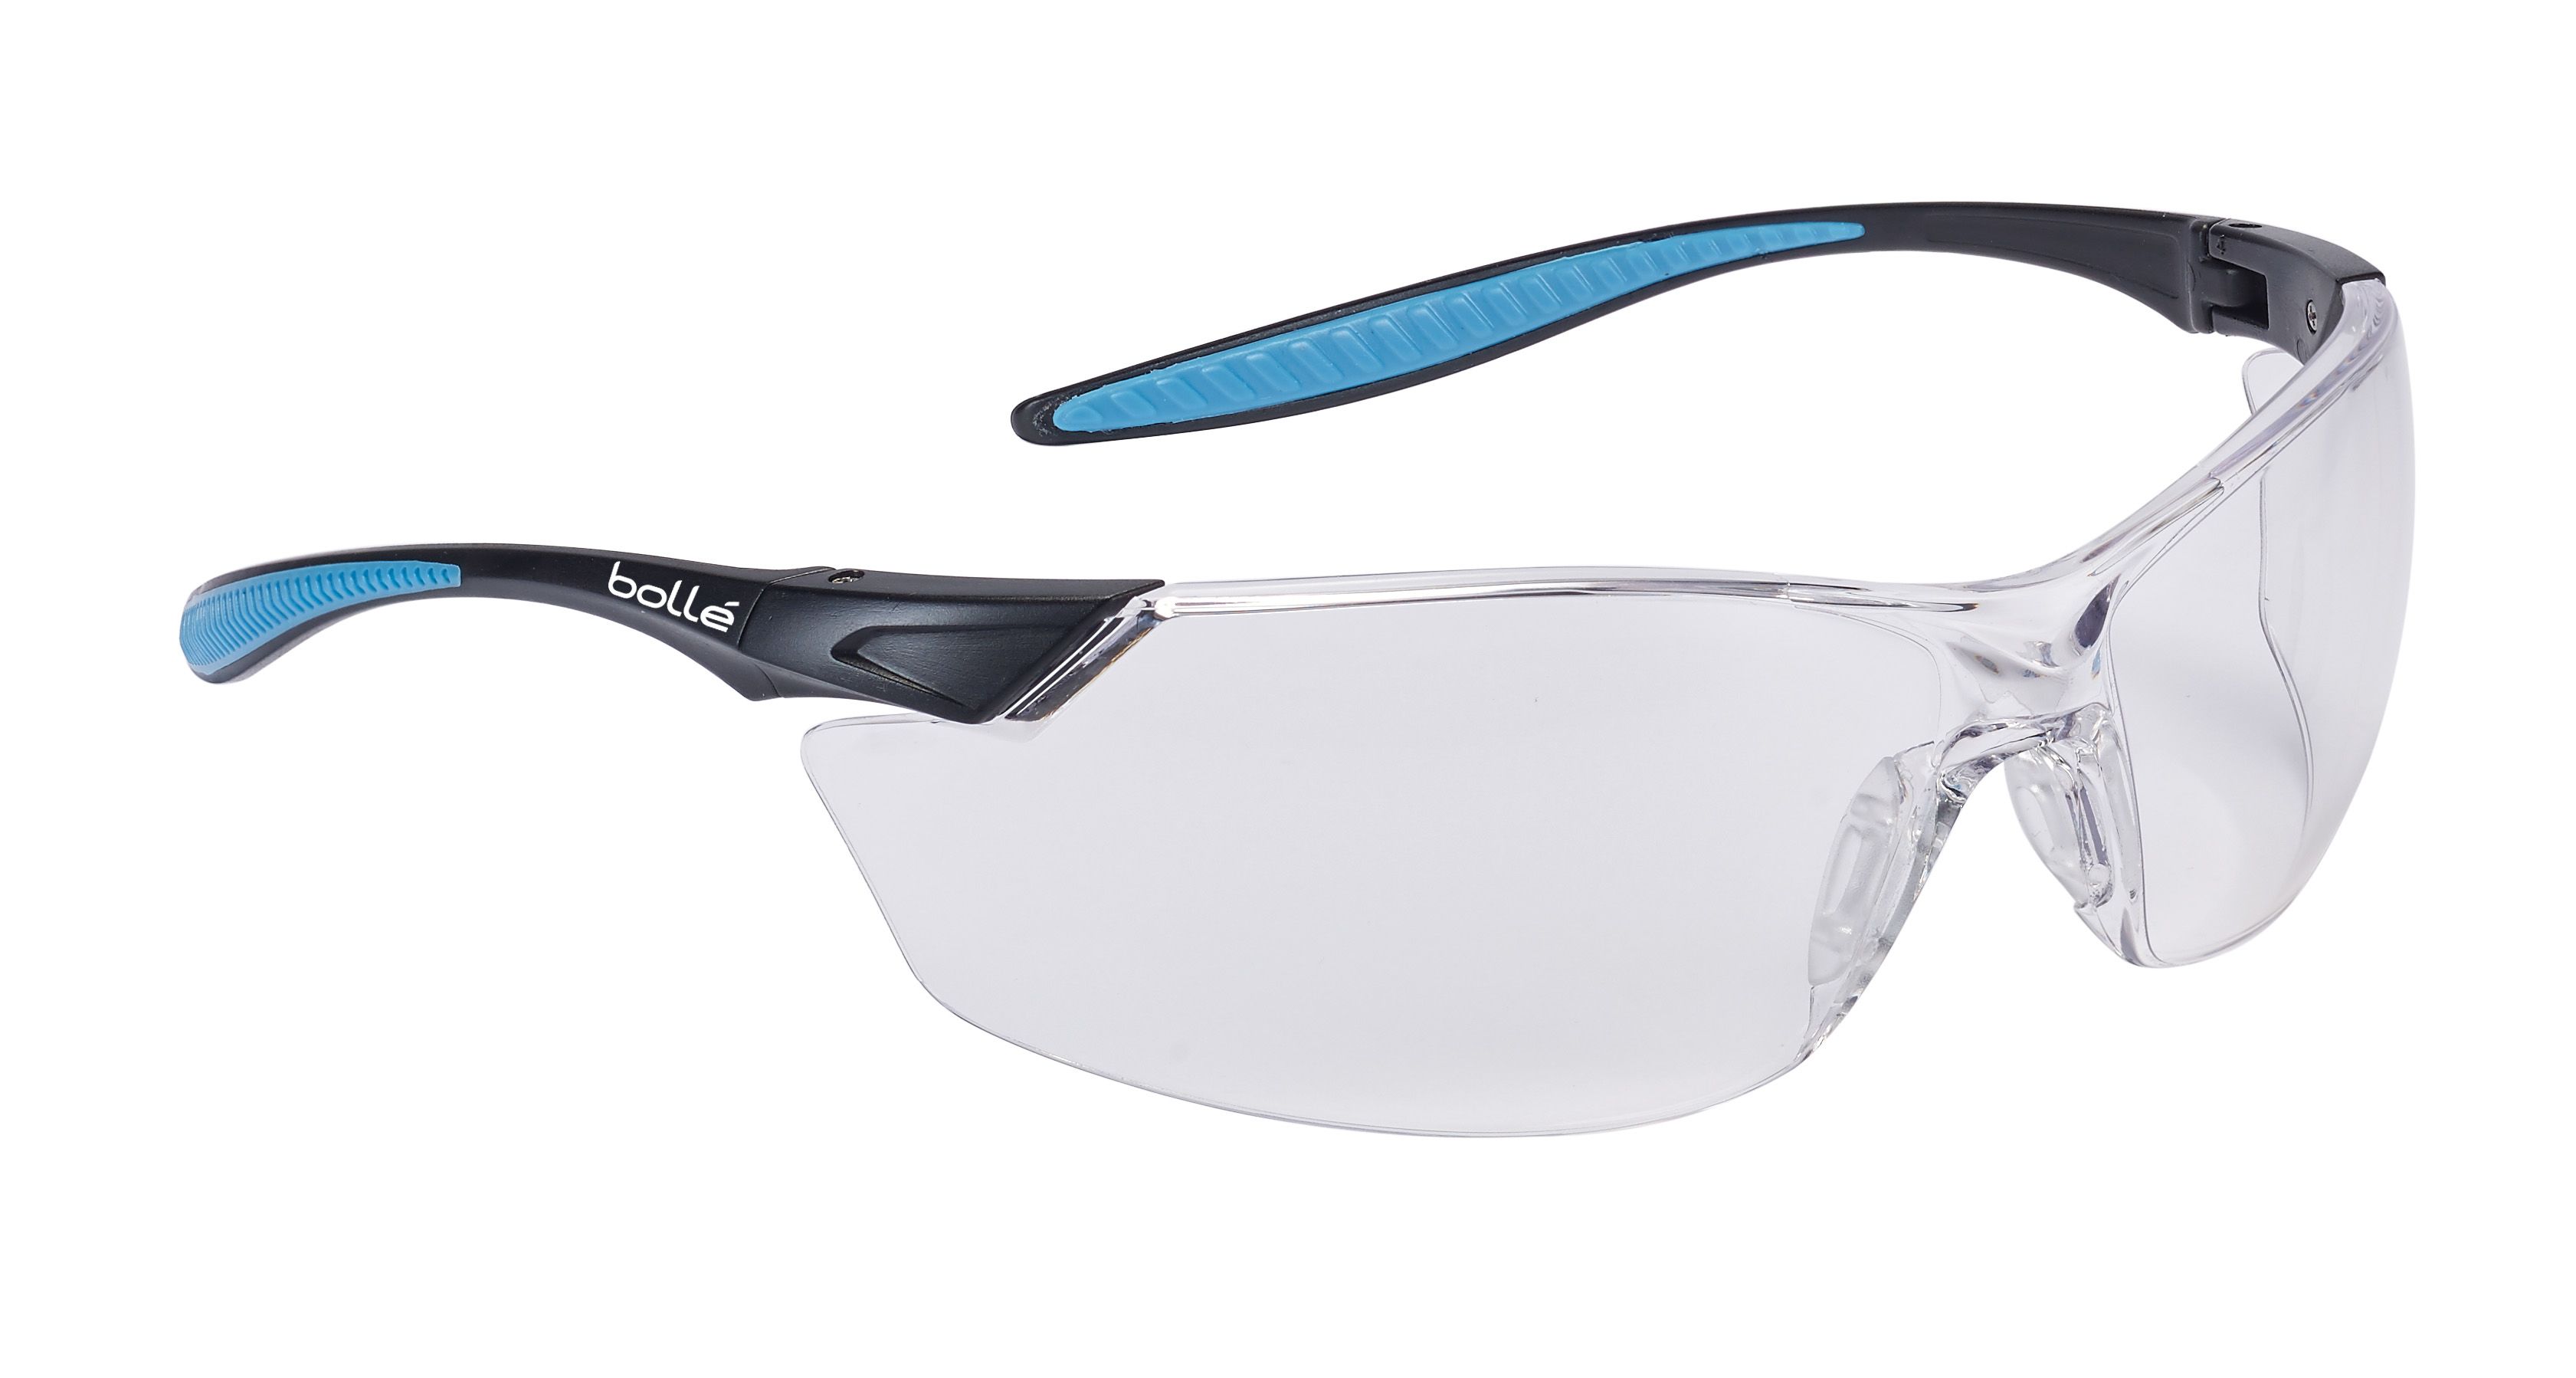 Bolle MAMBA Anti-Mist UV Safety Glasses, Clear Polycarbonate Lens, Vented